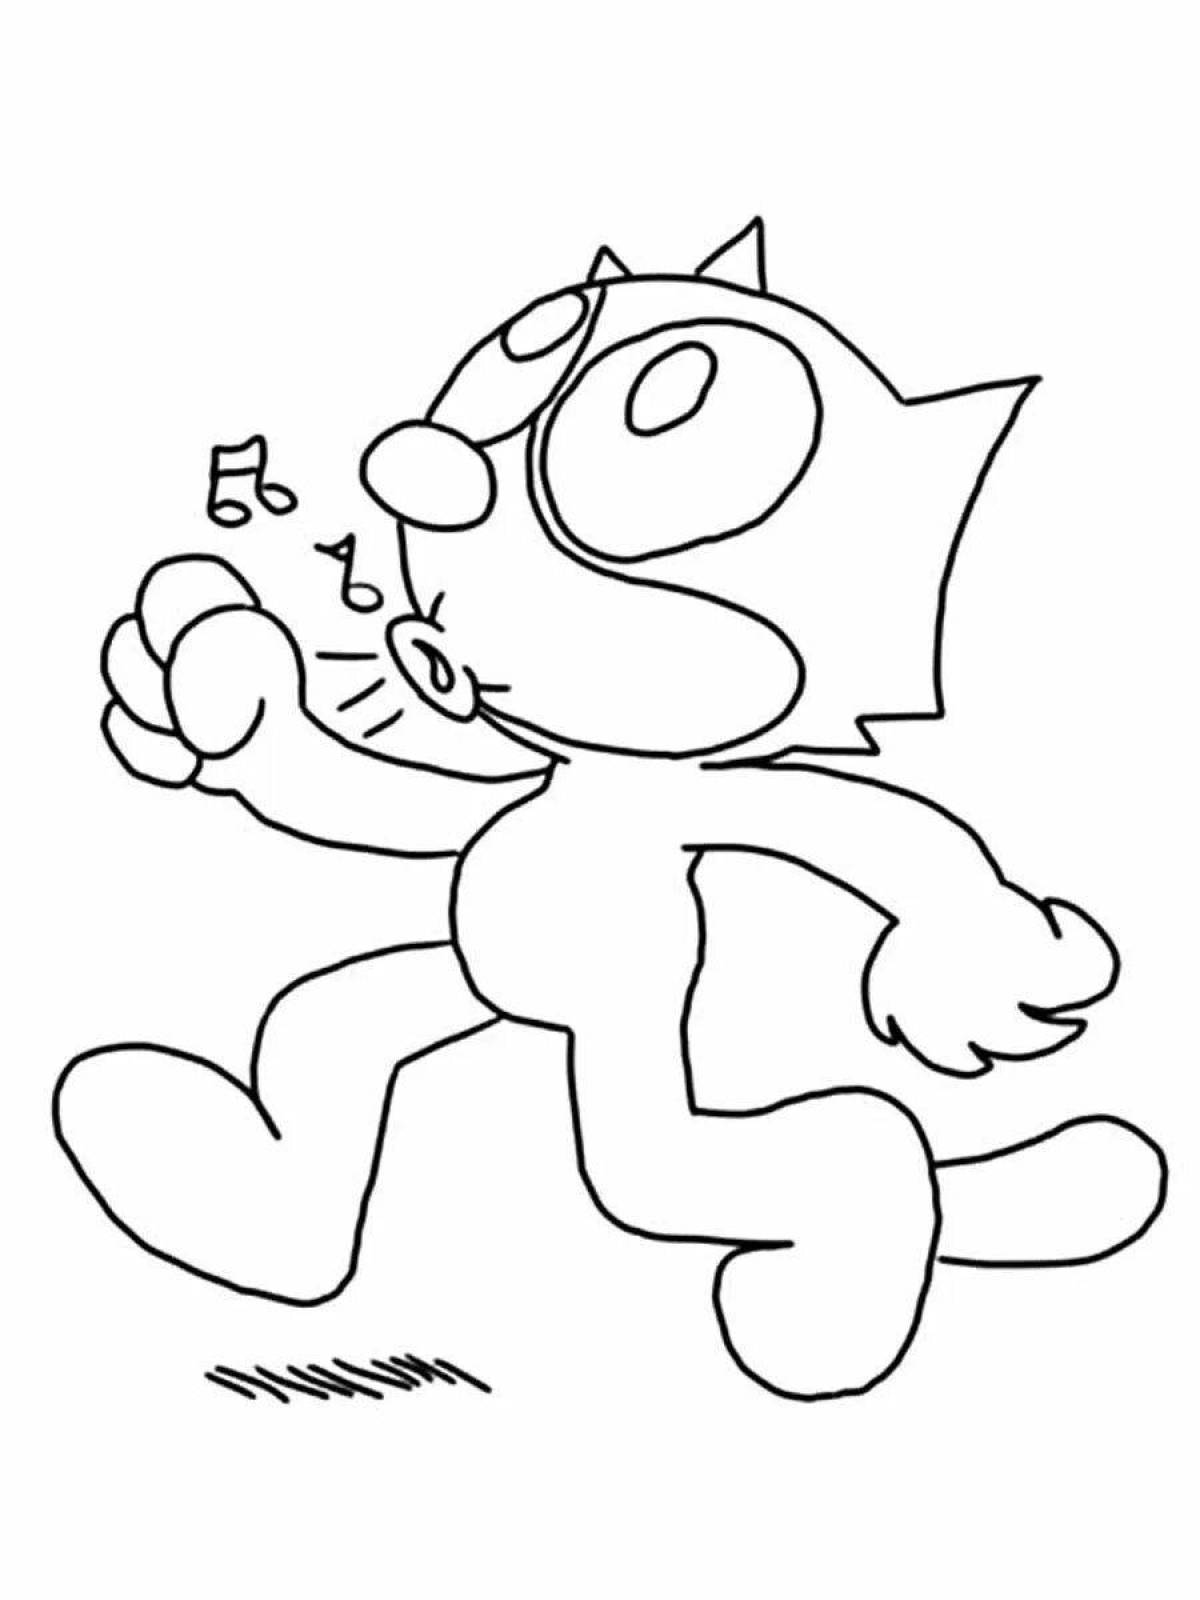 Engaging felix the cat coloring page